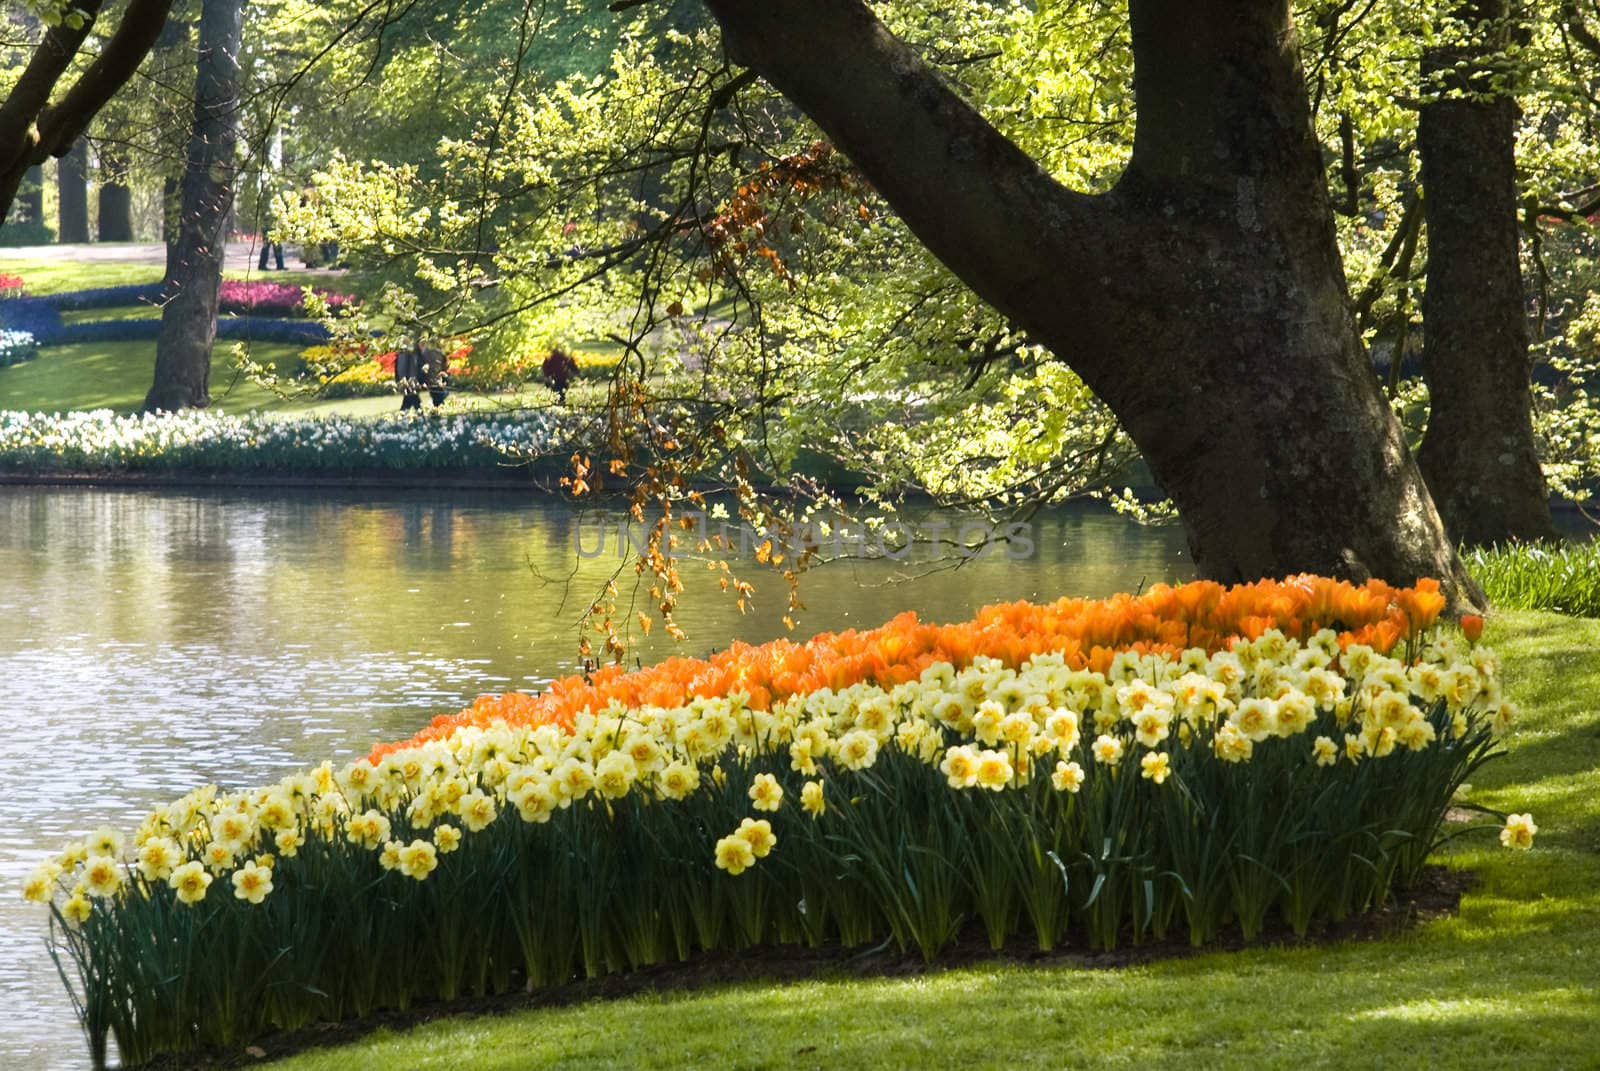 Pond in park with arrangement of flowers around in spring